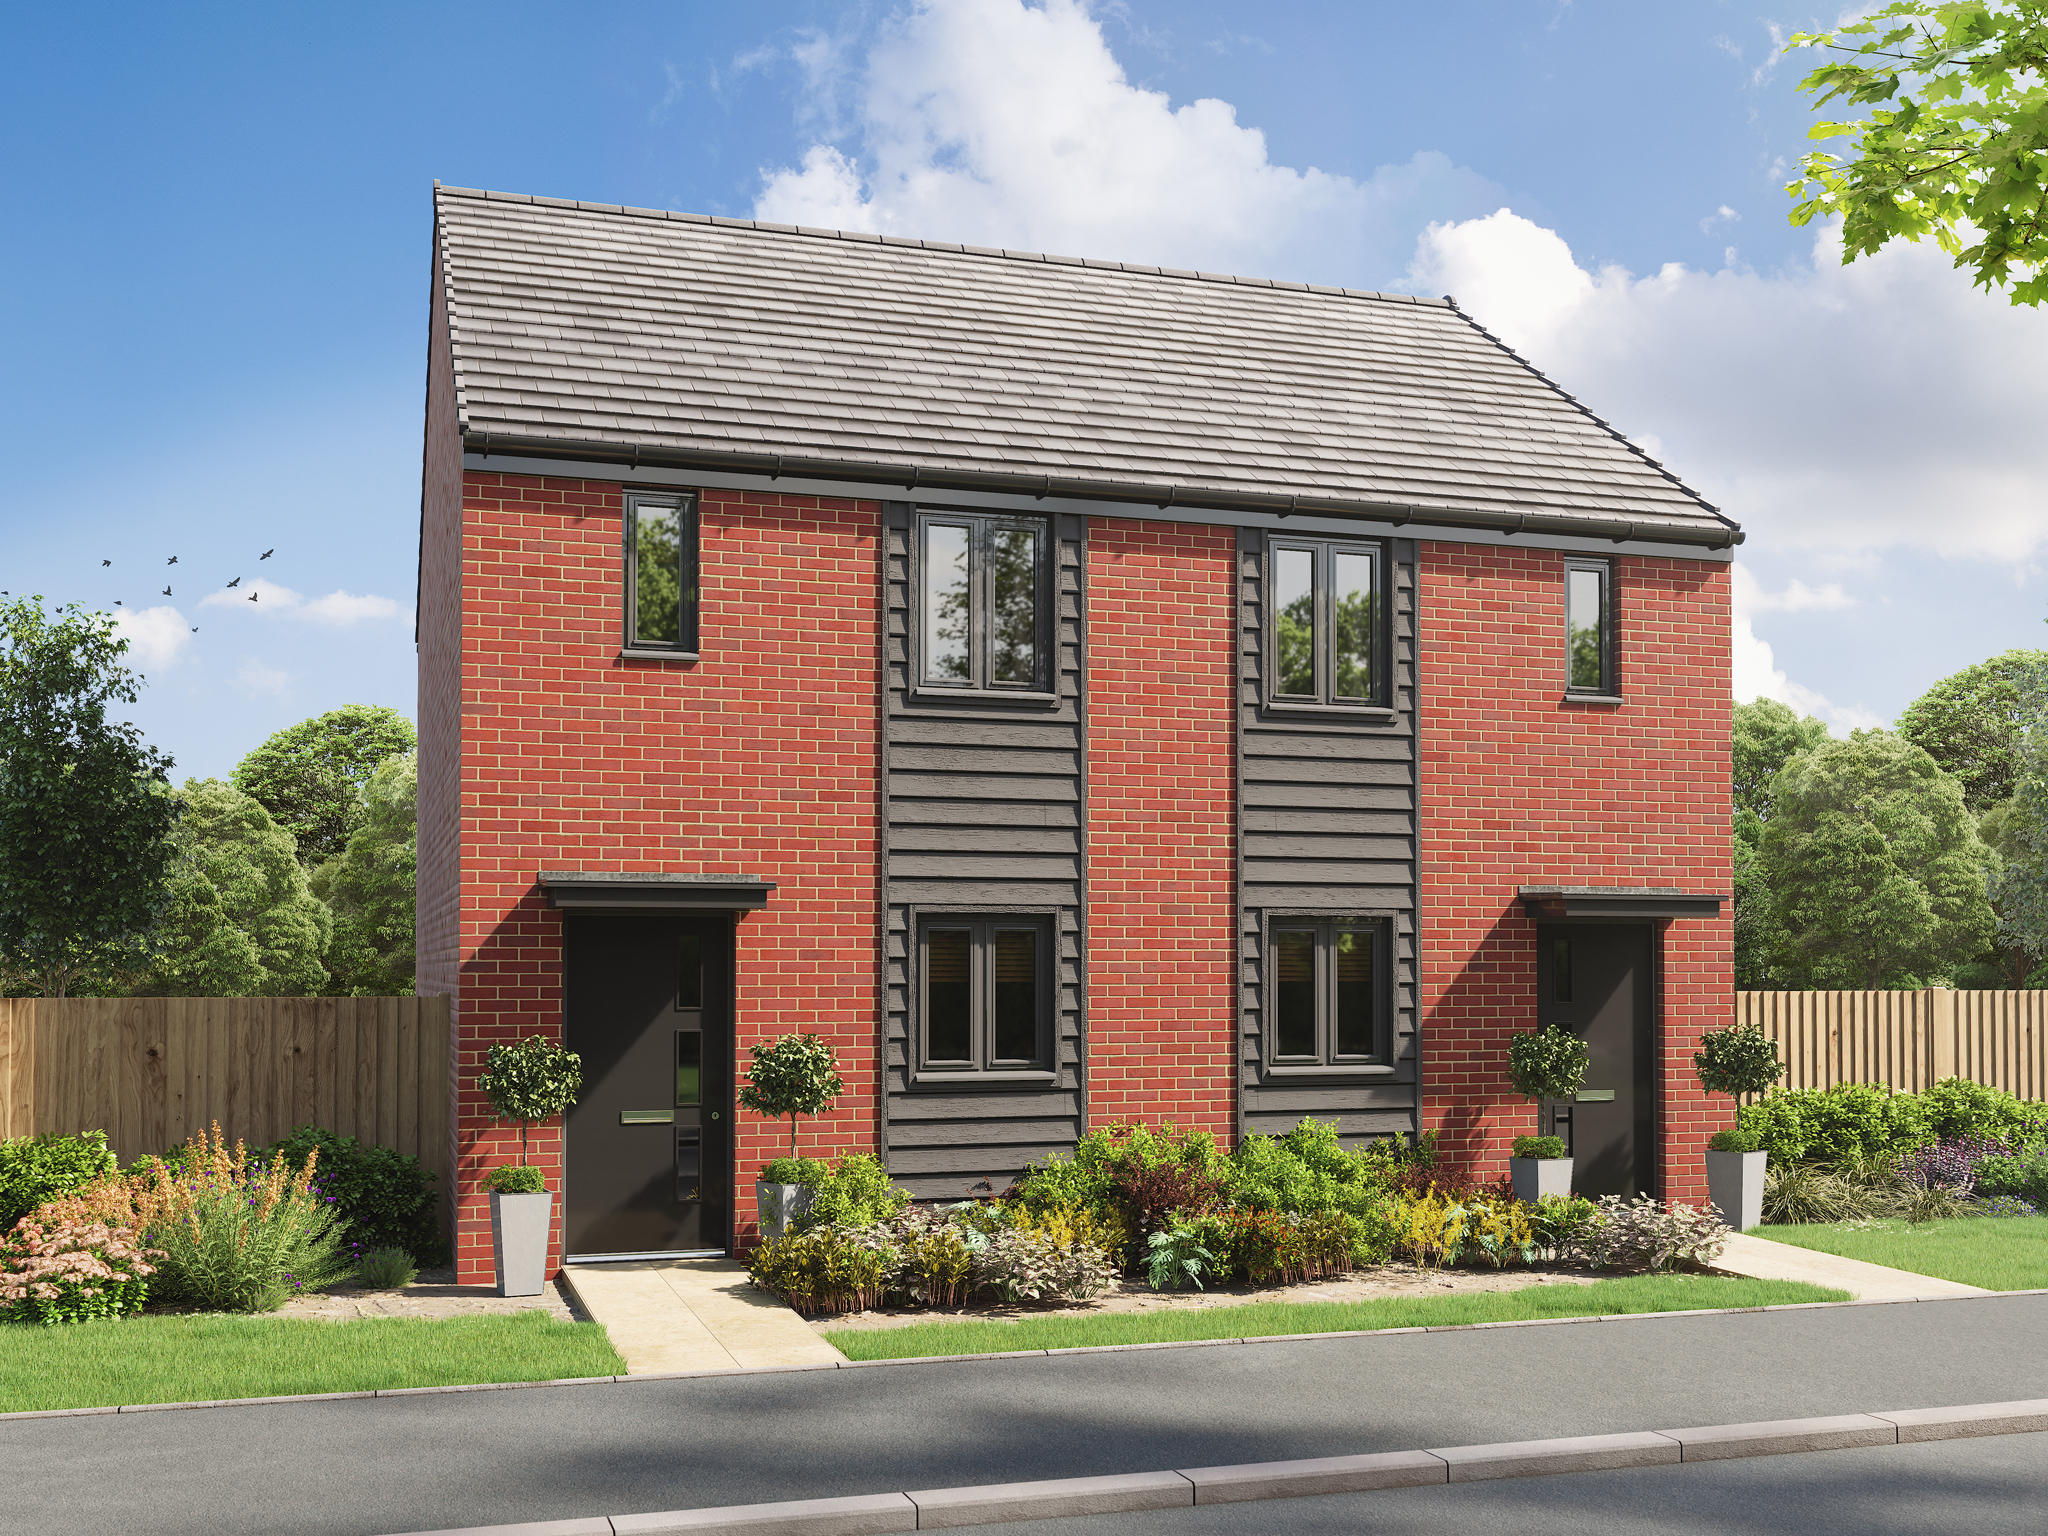 Persimmon Homes Lakedale at Whiteley Meadows - Whiteley, Hampshire PO15 7PF - 01329 759010 | ShowMeLocal.com